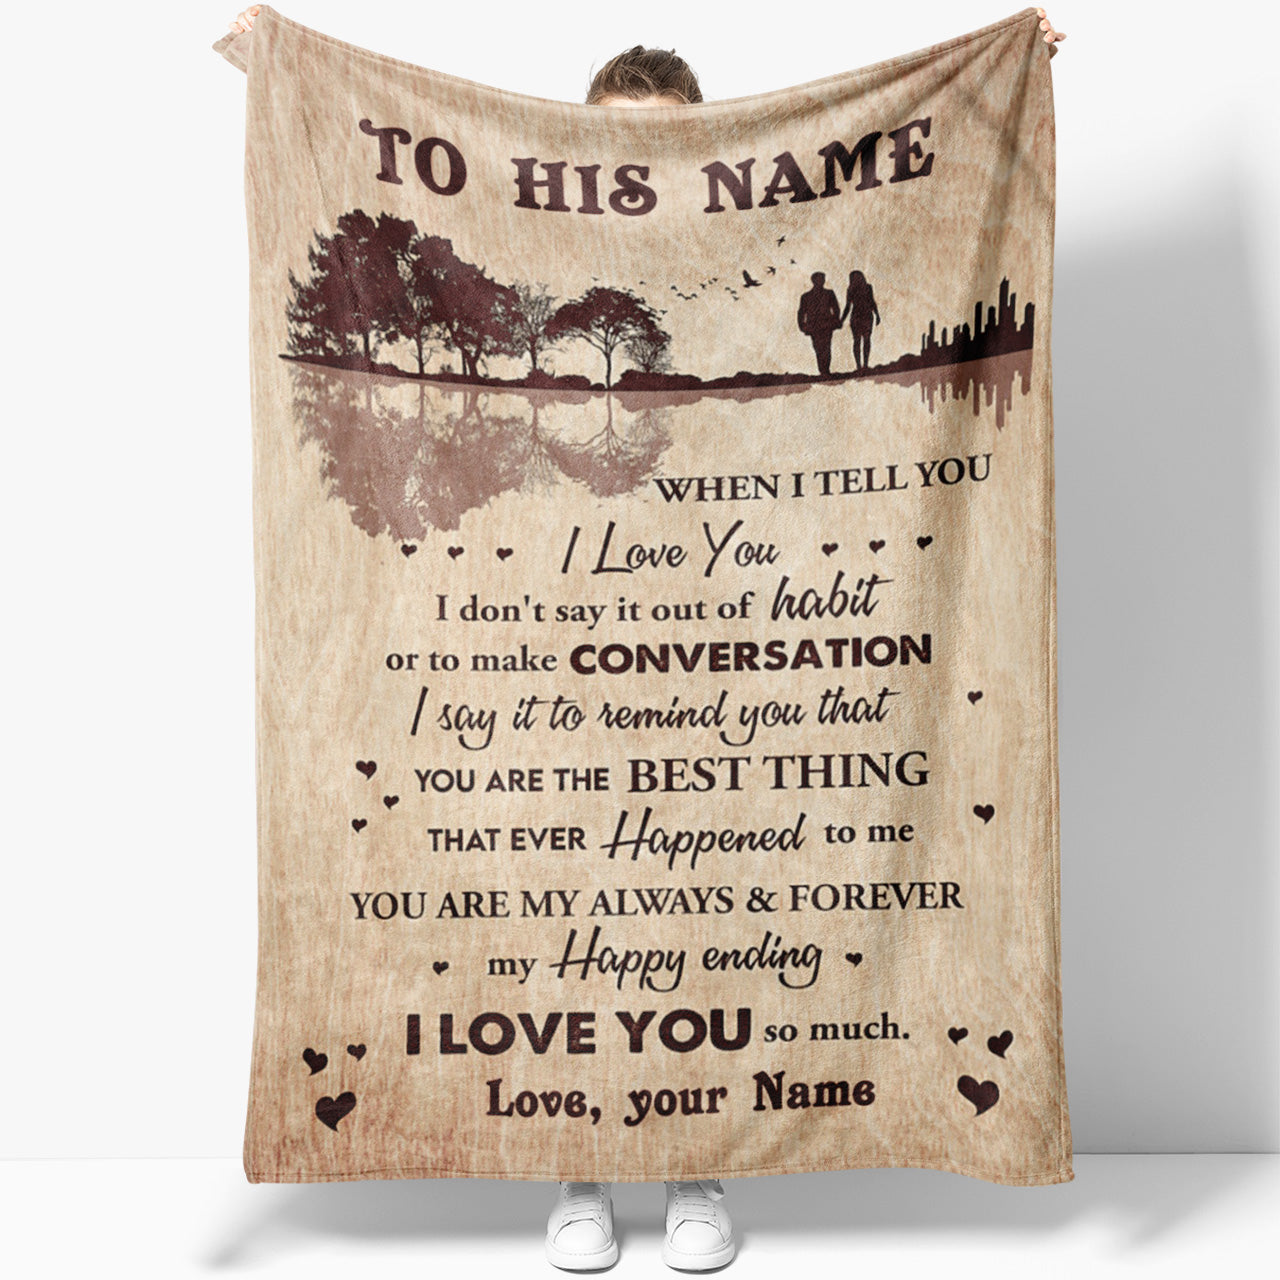 Blanket Gift For Her, Personalized Gifts For Her, You Are the Love